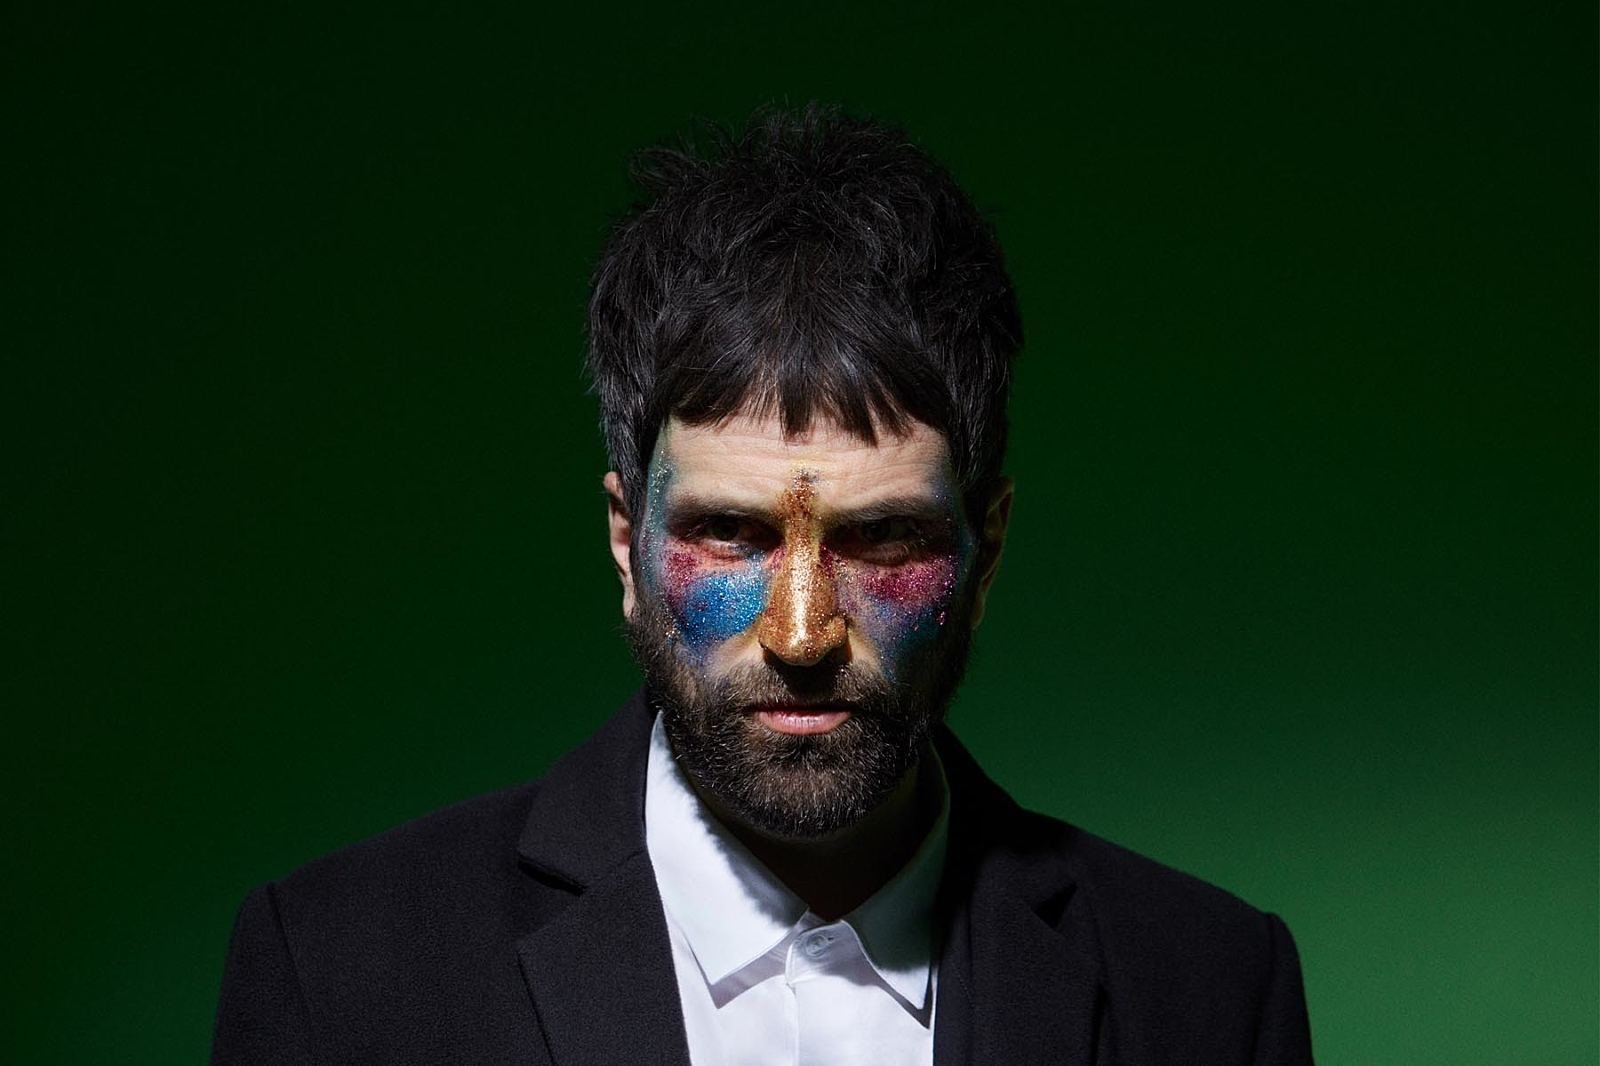 Kasabian's Serge Pizzorno launches new project The S.L.P., shares new track